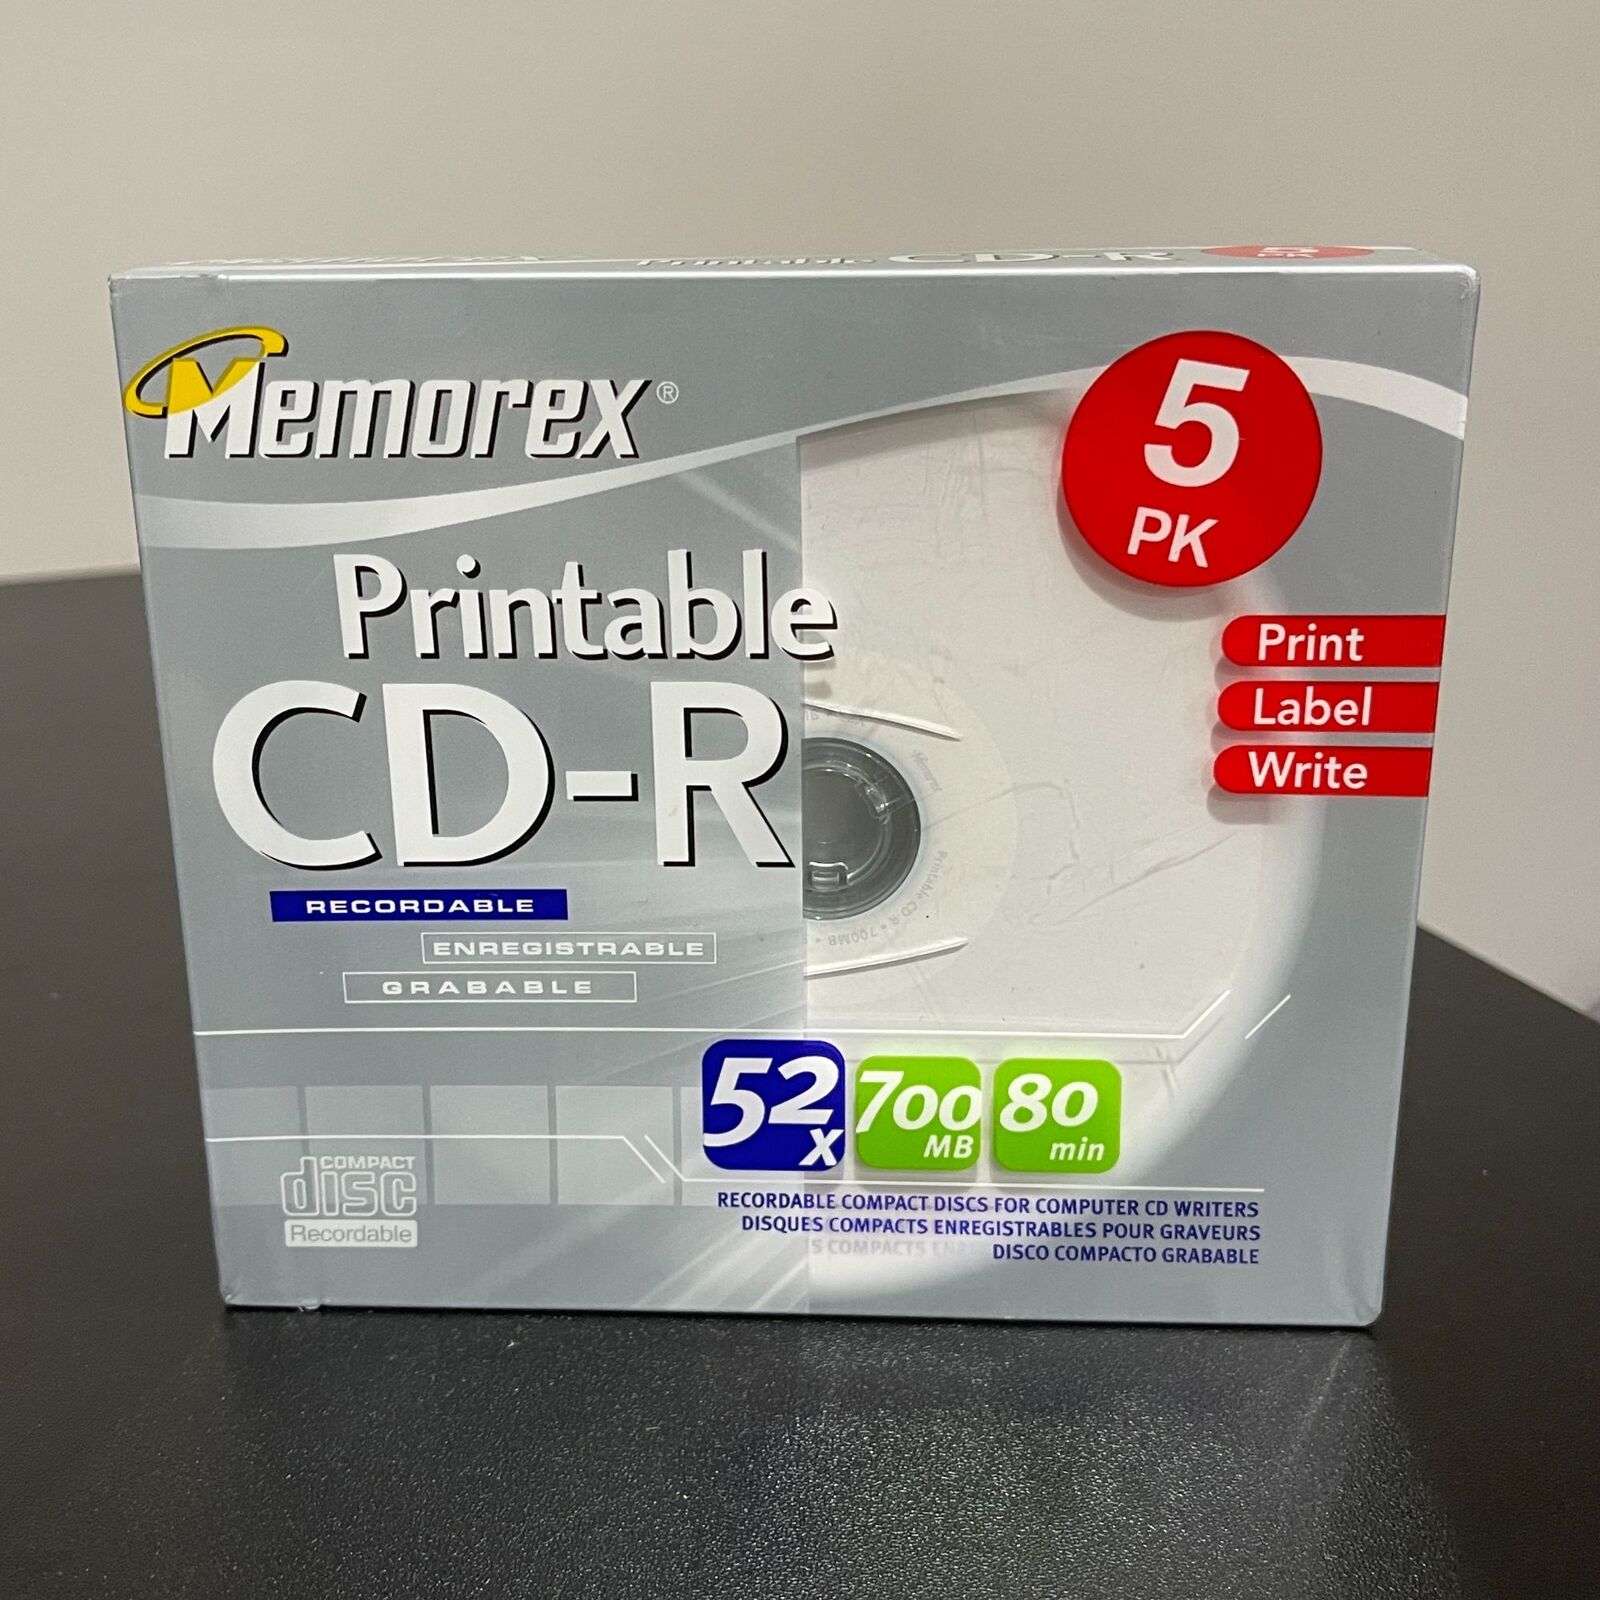 New Memorex Printable CD-R Recordable Compact Discs 52X 700 MN 80 Min 5 Pack